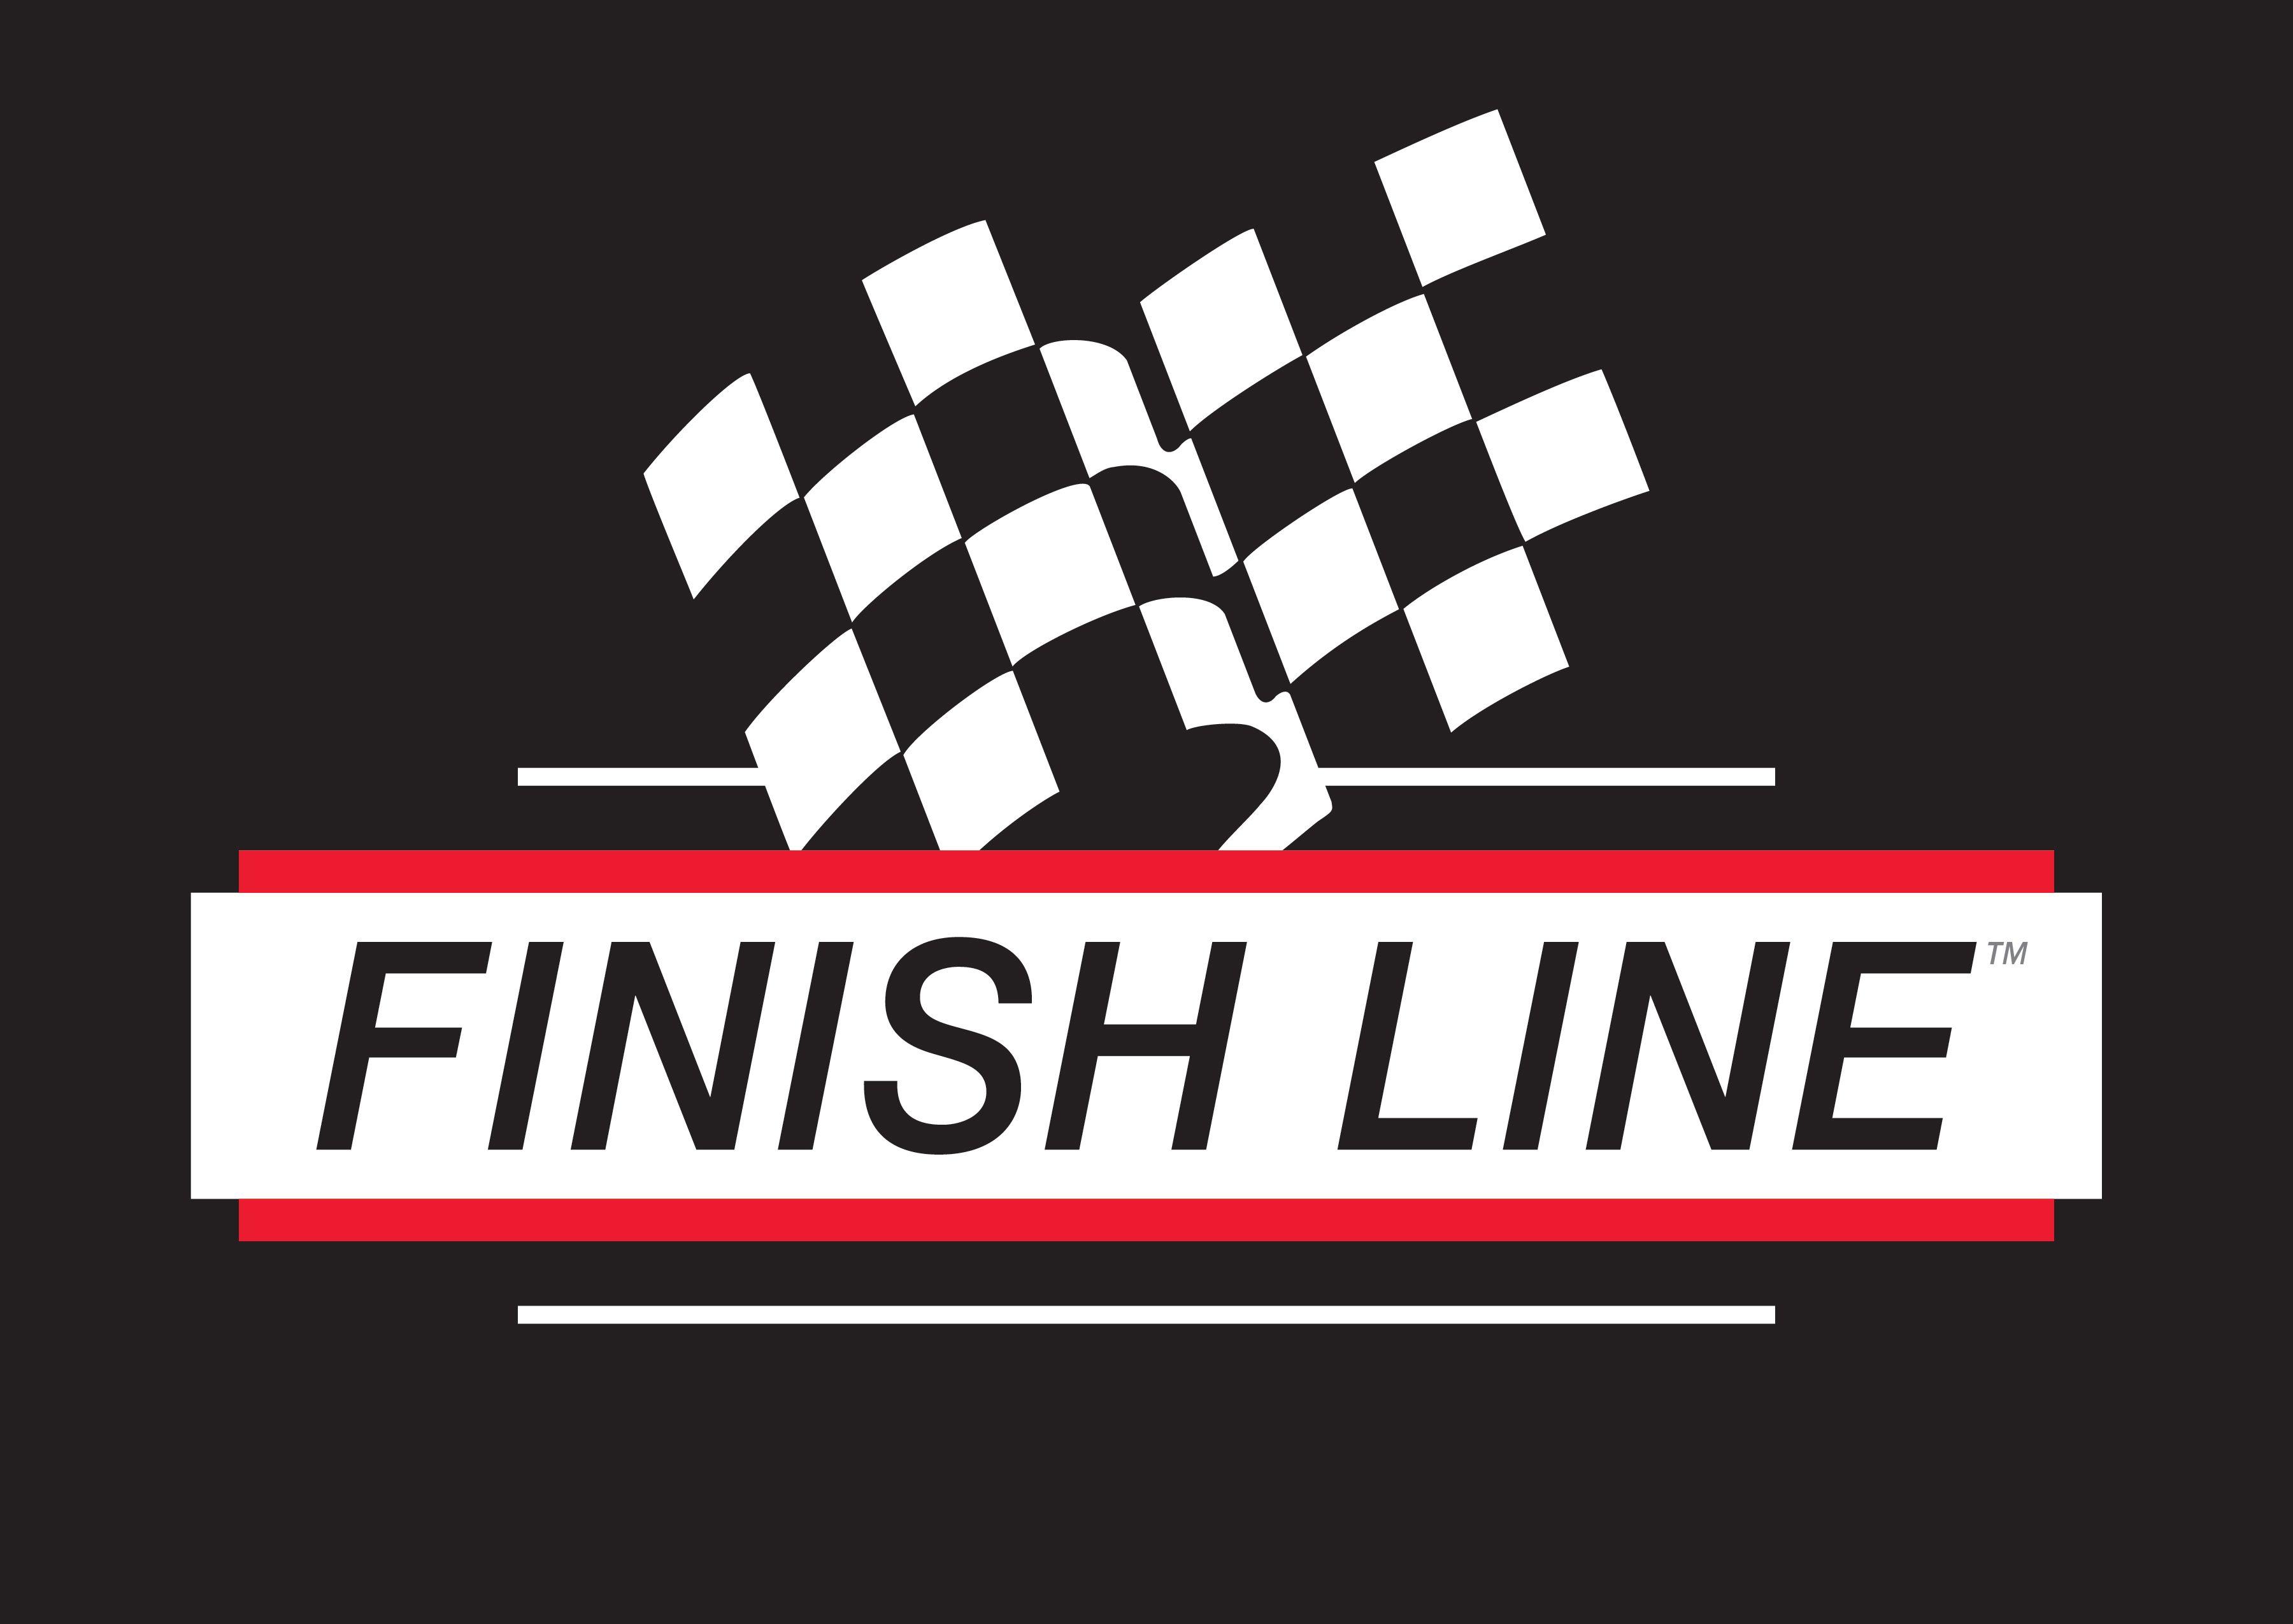 Finishline Logo - Finish Line - Bicycle Lubricants and Care Products - Additional Items